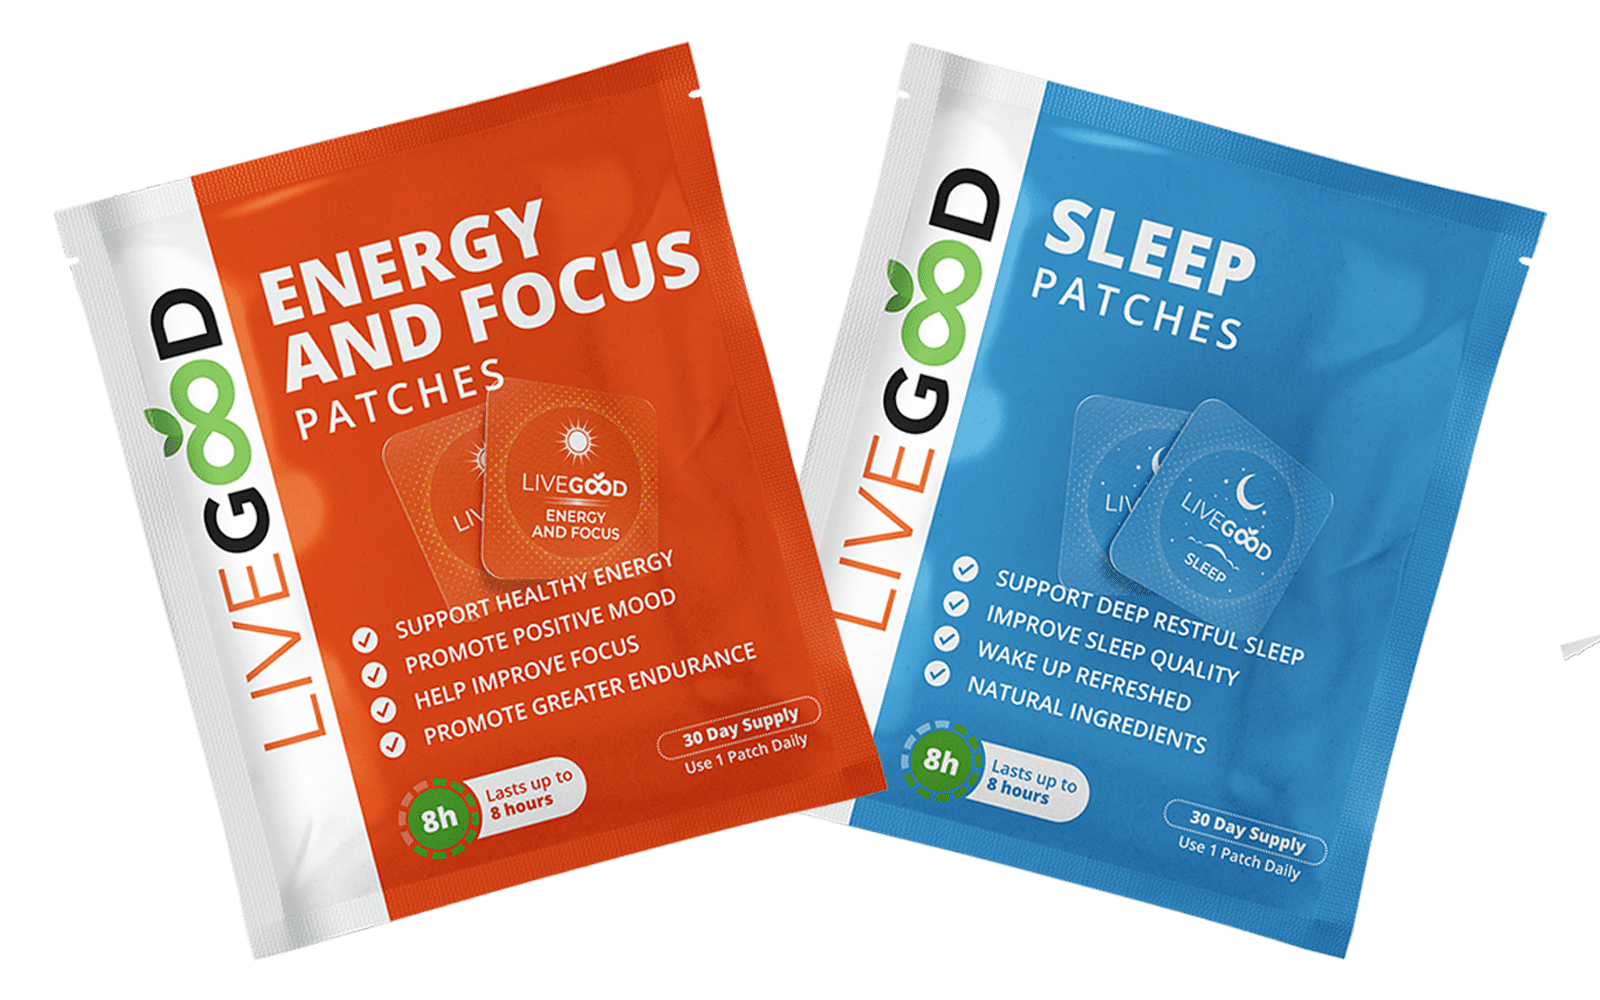 Stay Active, Sleep Deep: The Dual Benefits of LiveGood’s AM/PM Patch Pack